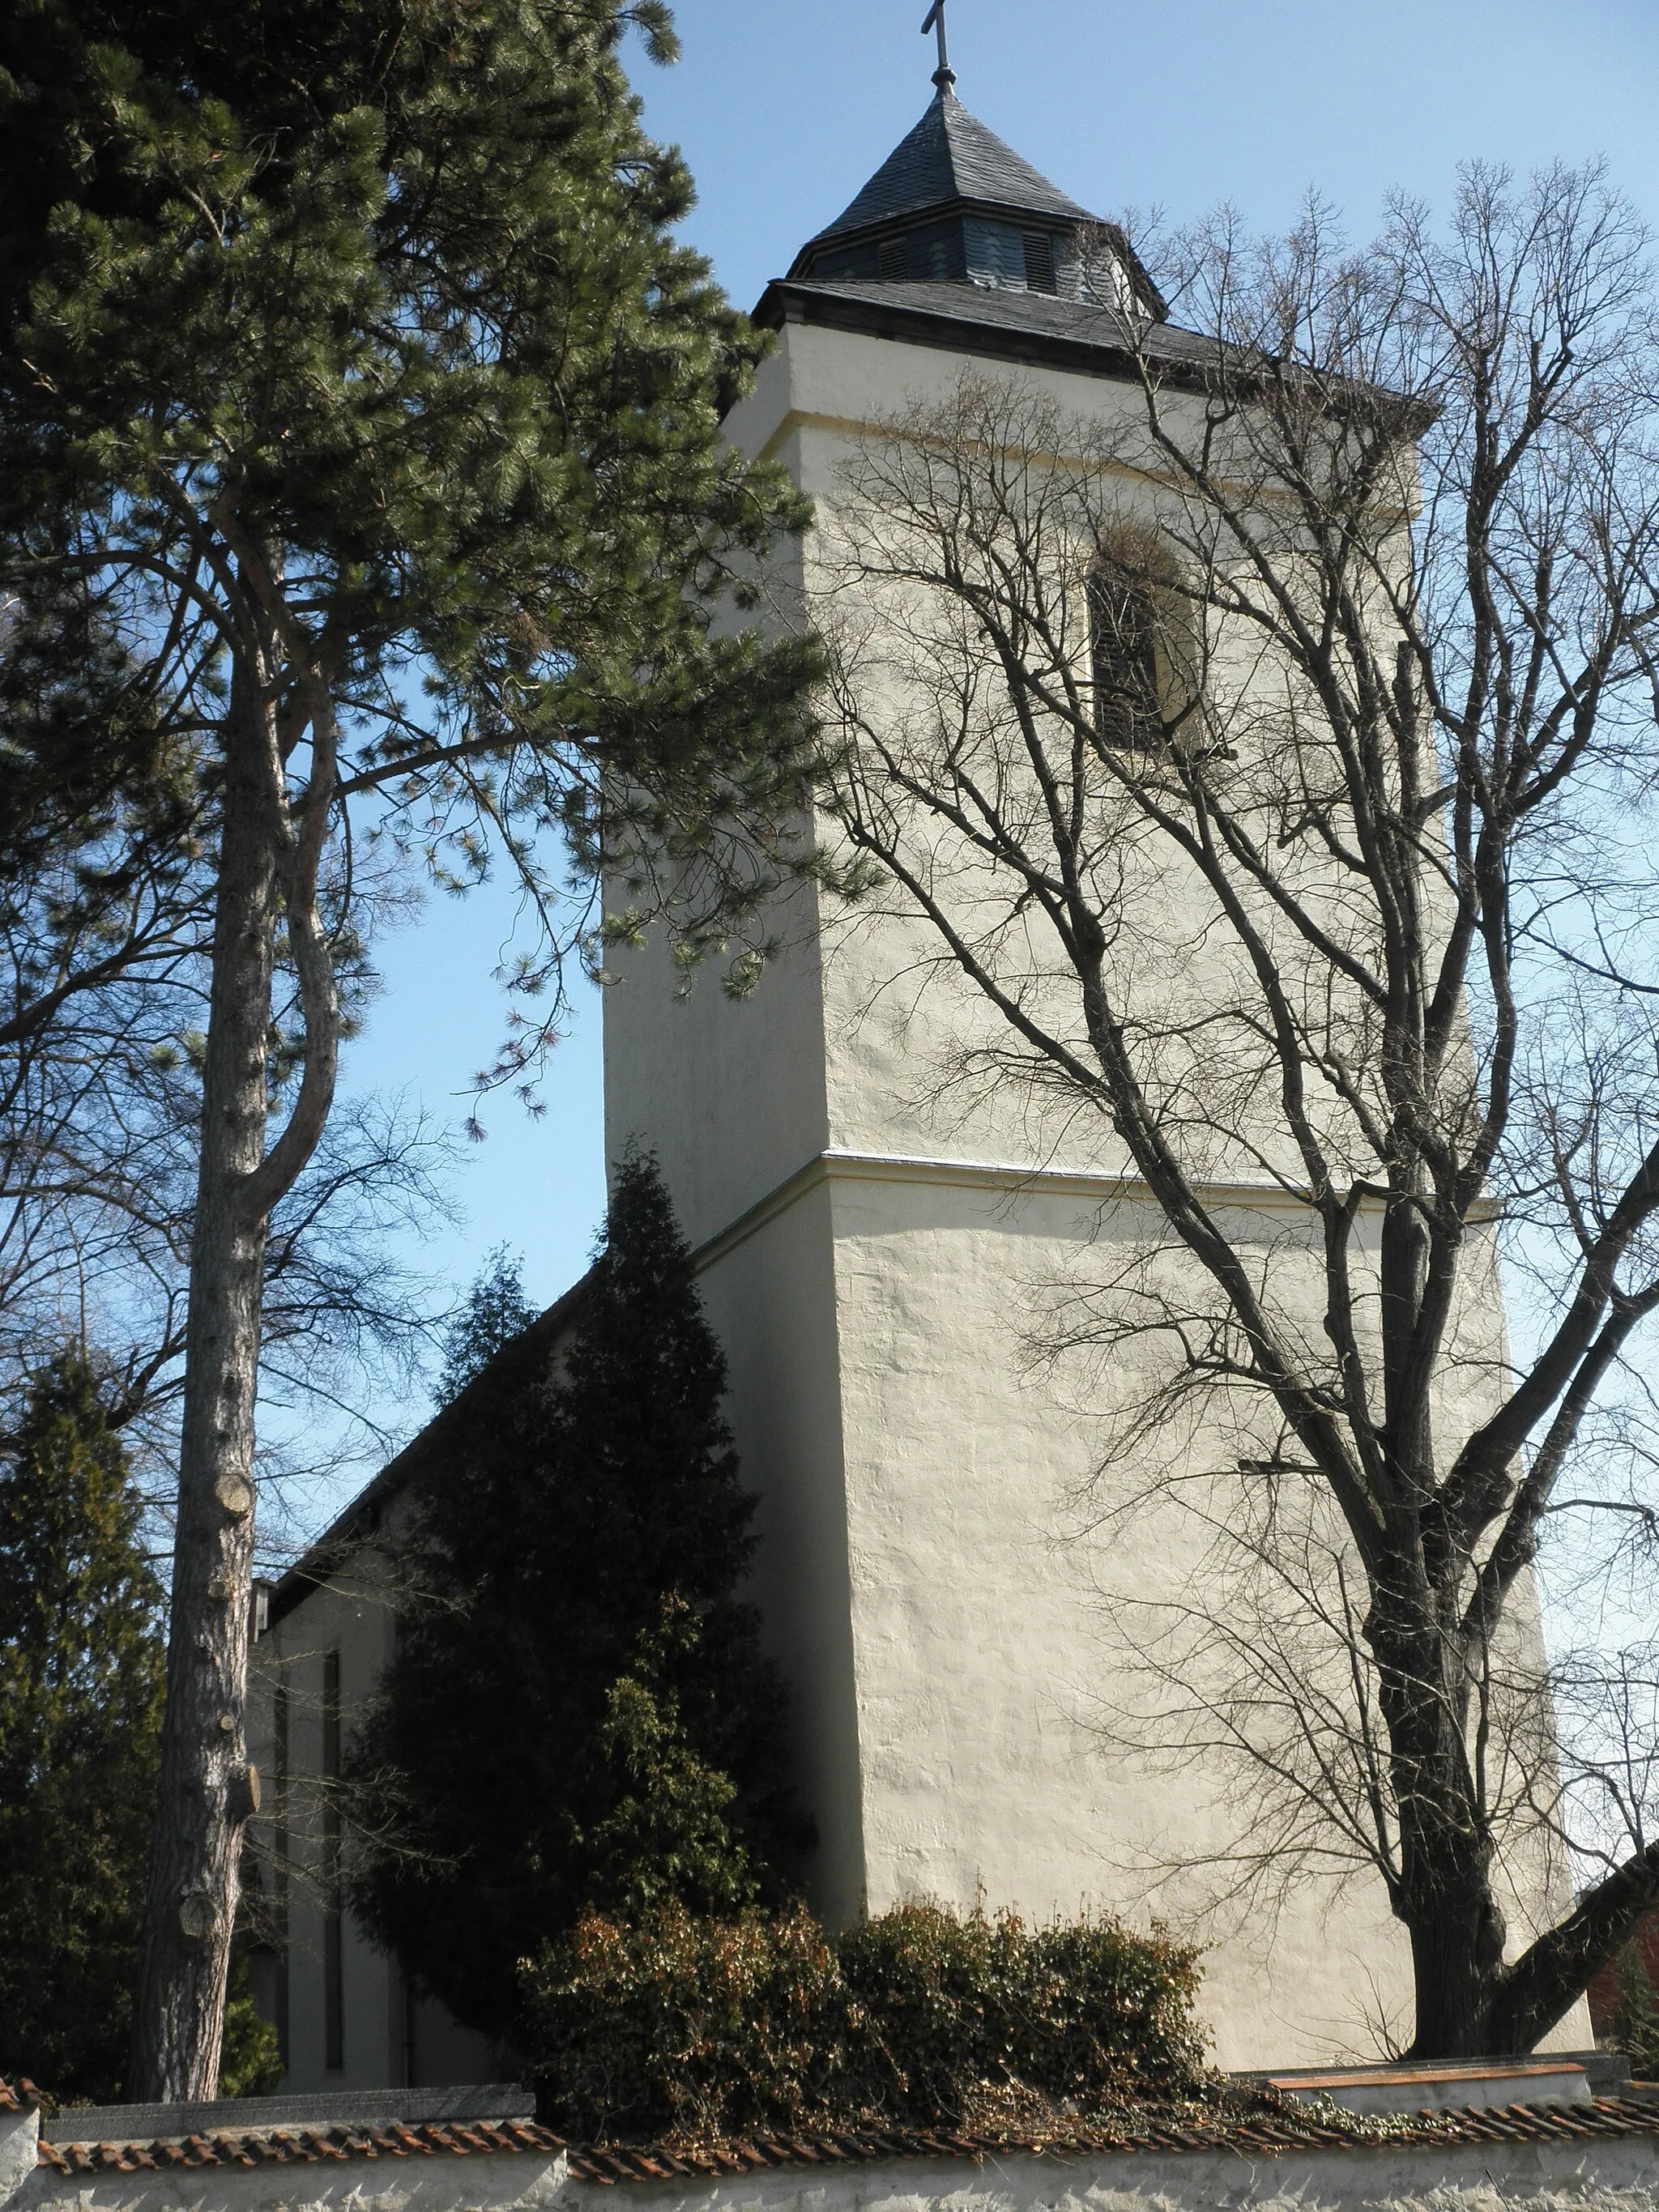 Photo showing: Tower of the church in Krölpa in Thuringia